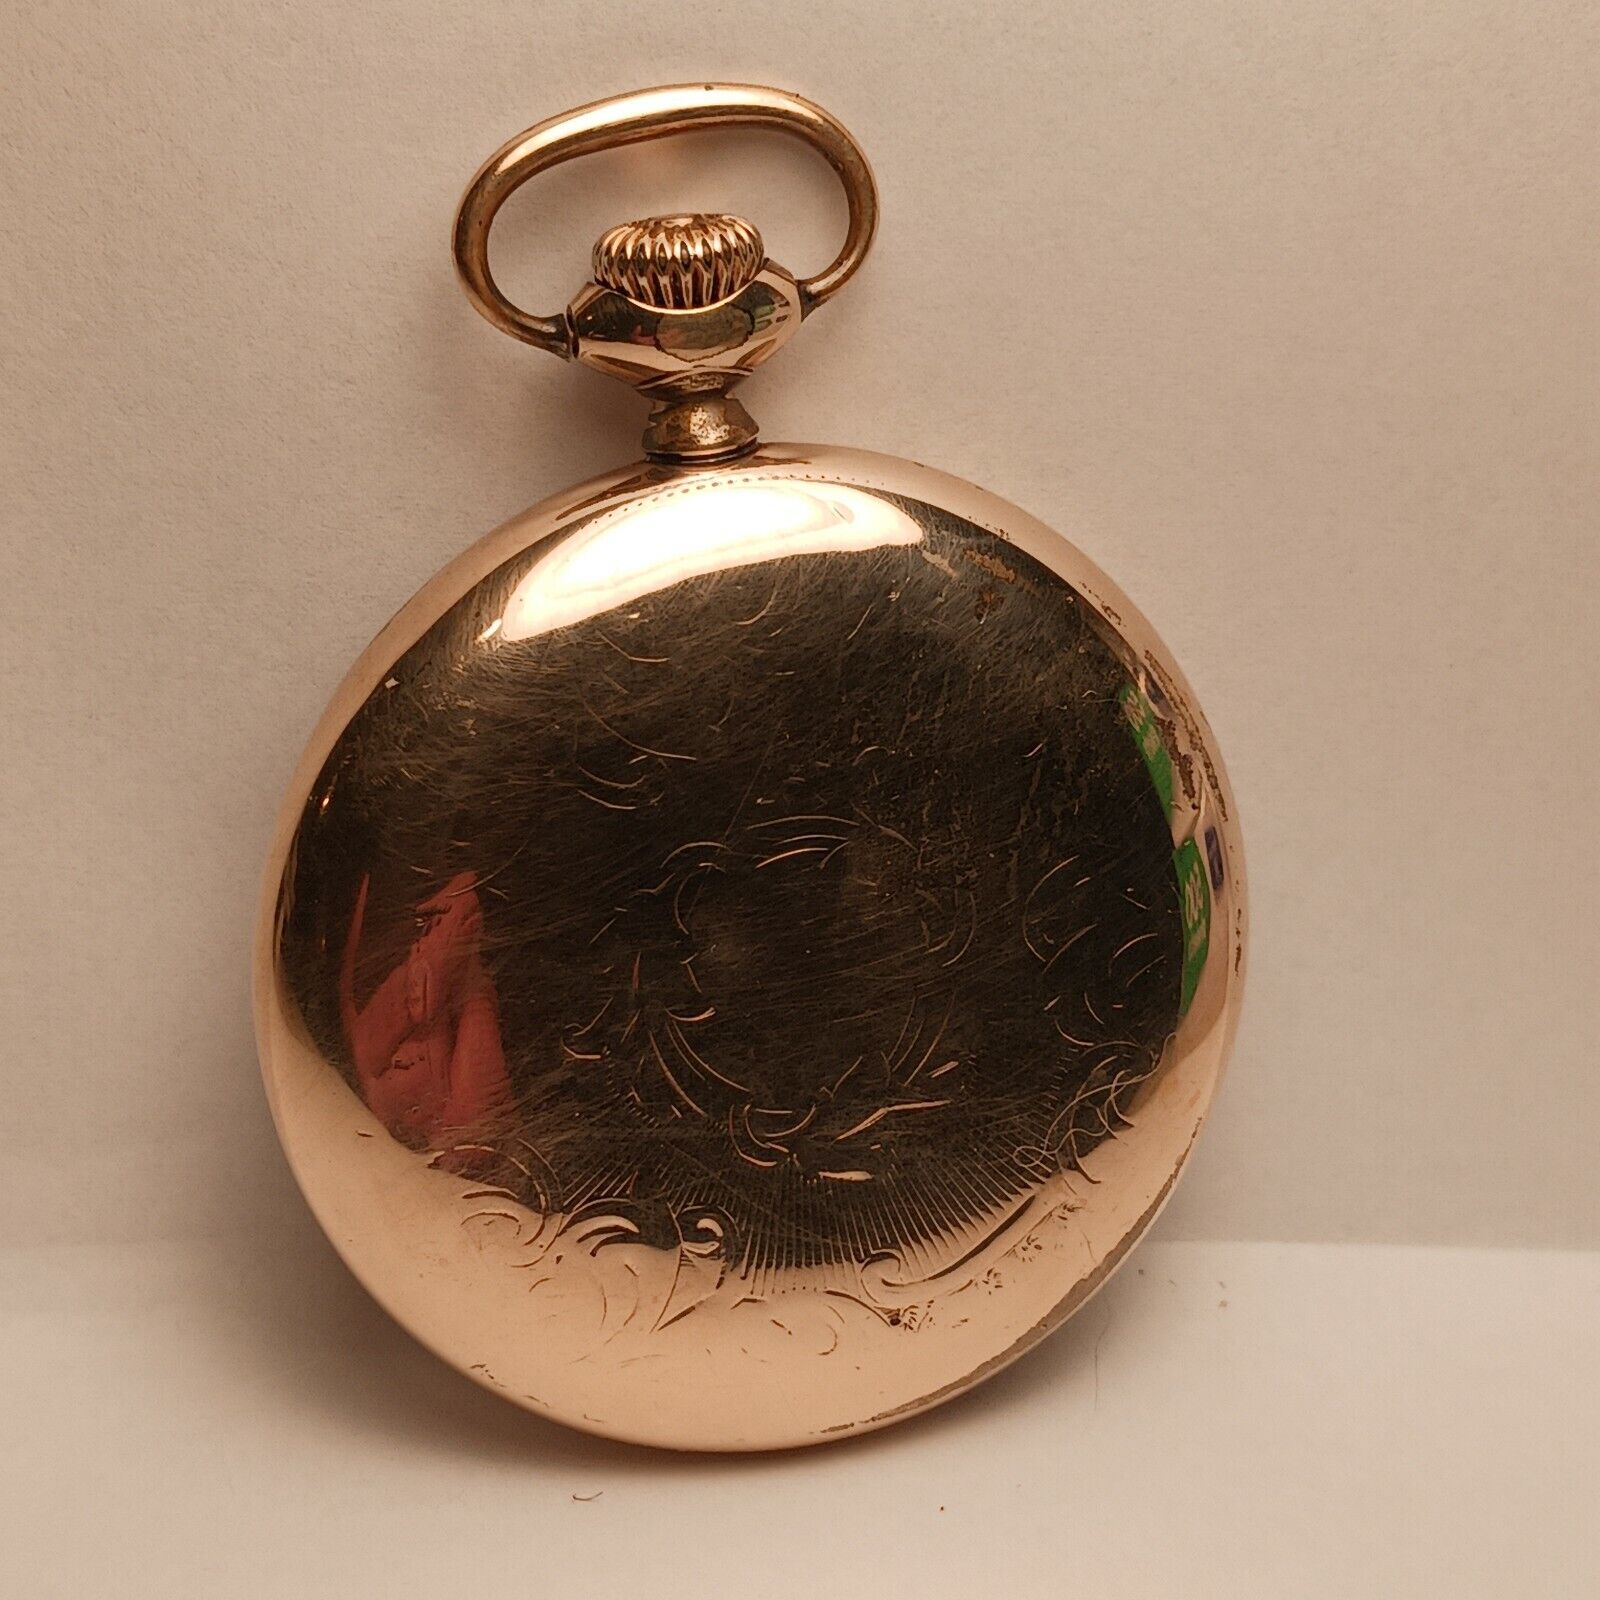 ~*ANTIQUE BALL RAILROAD 16 SIZE GOLD FILLED POCKET WATCH CASE*~